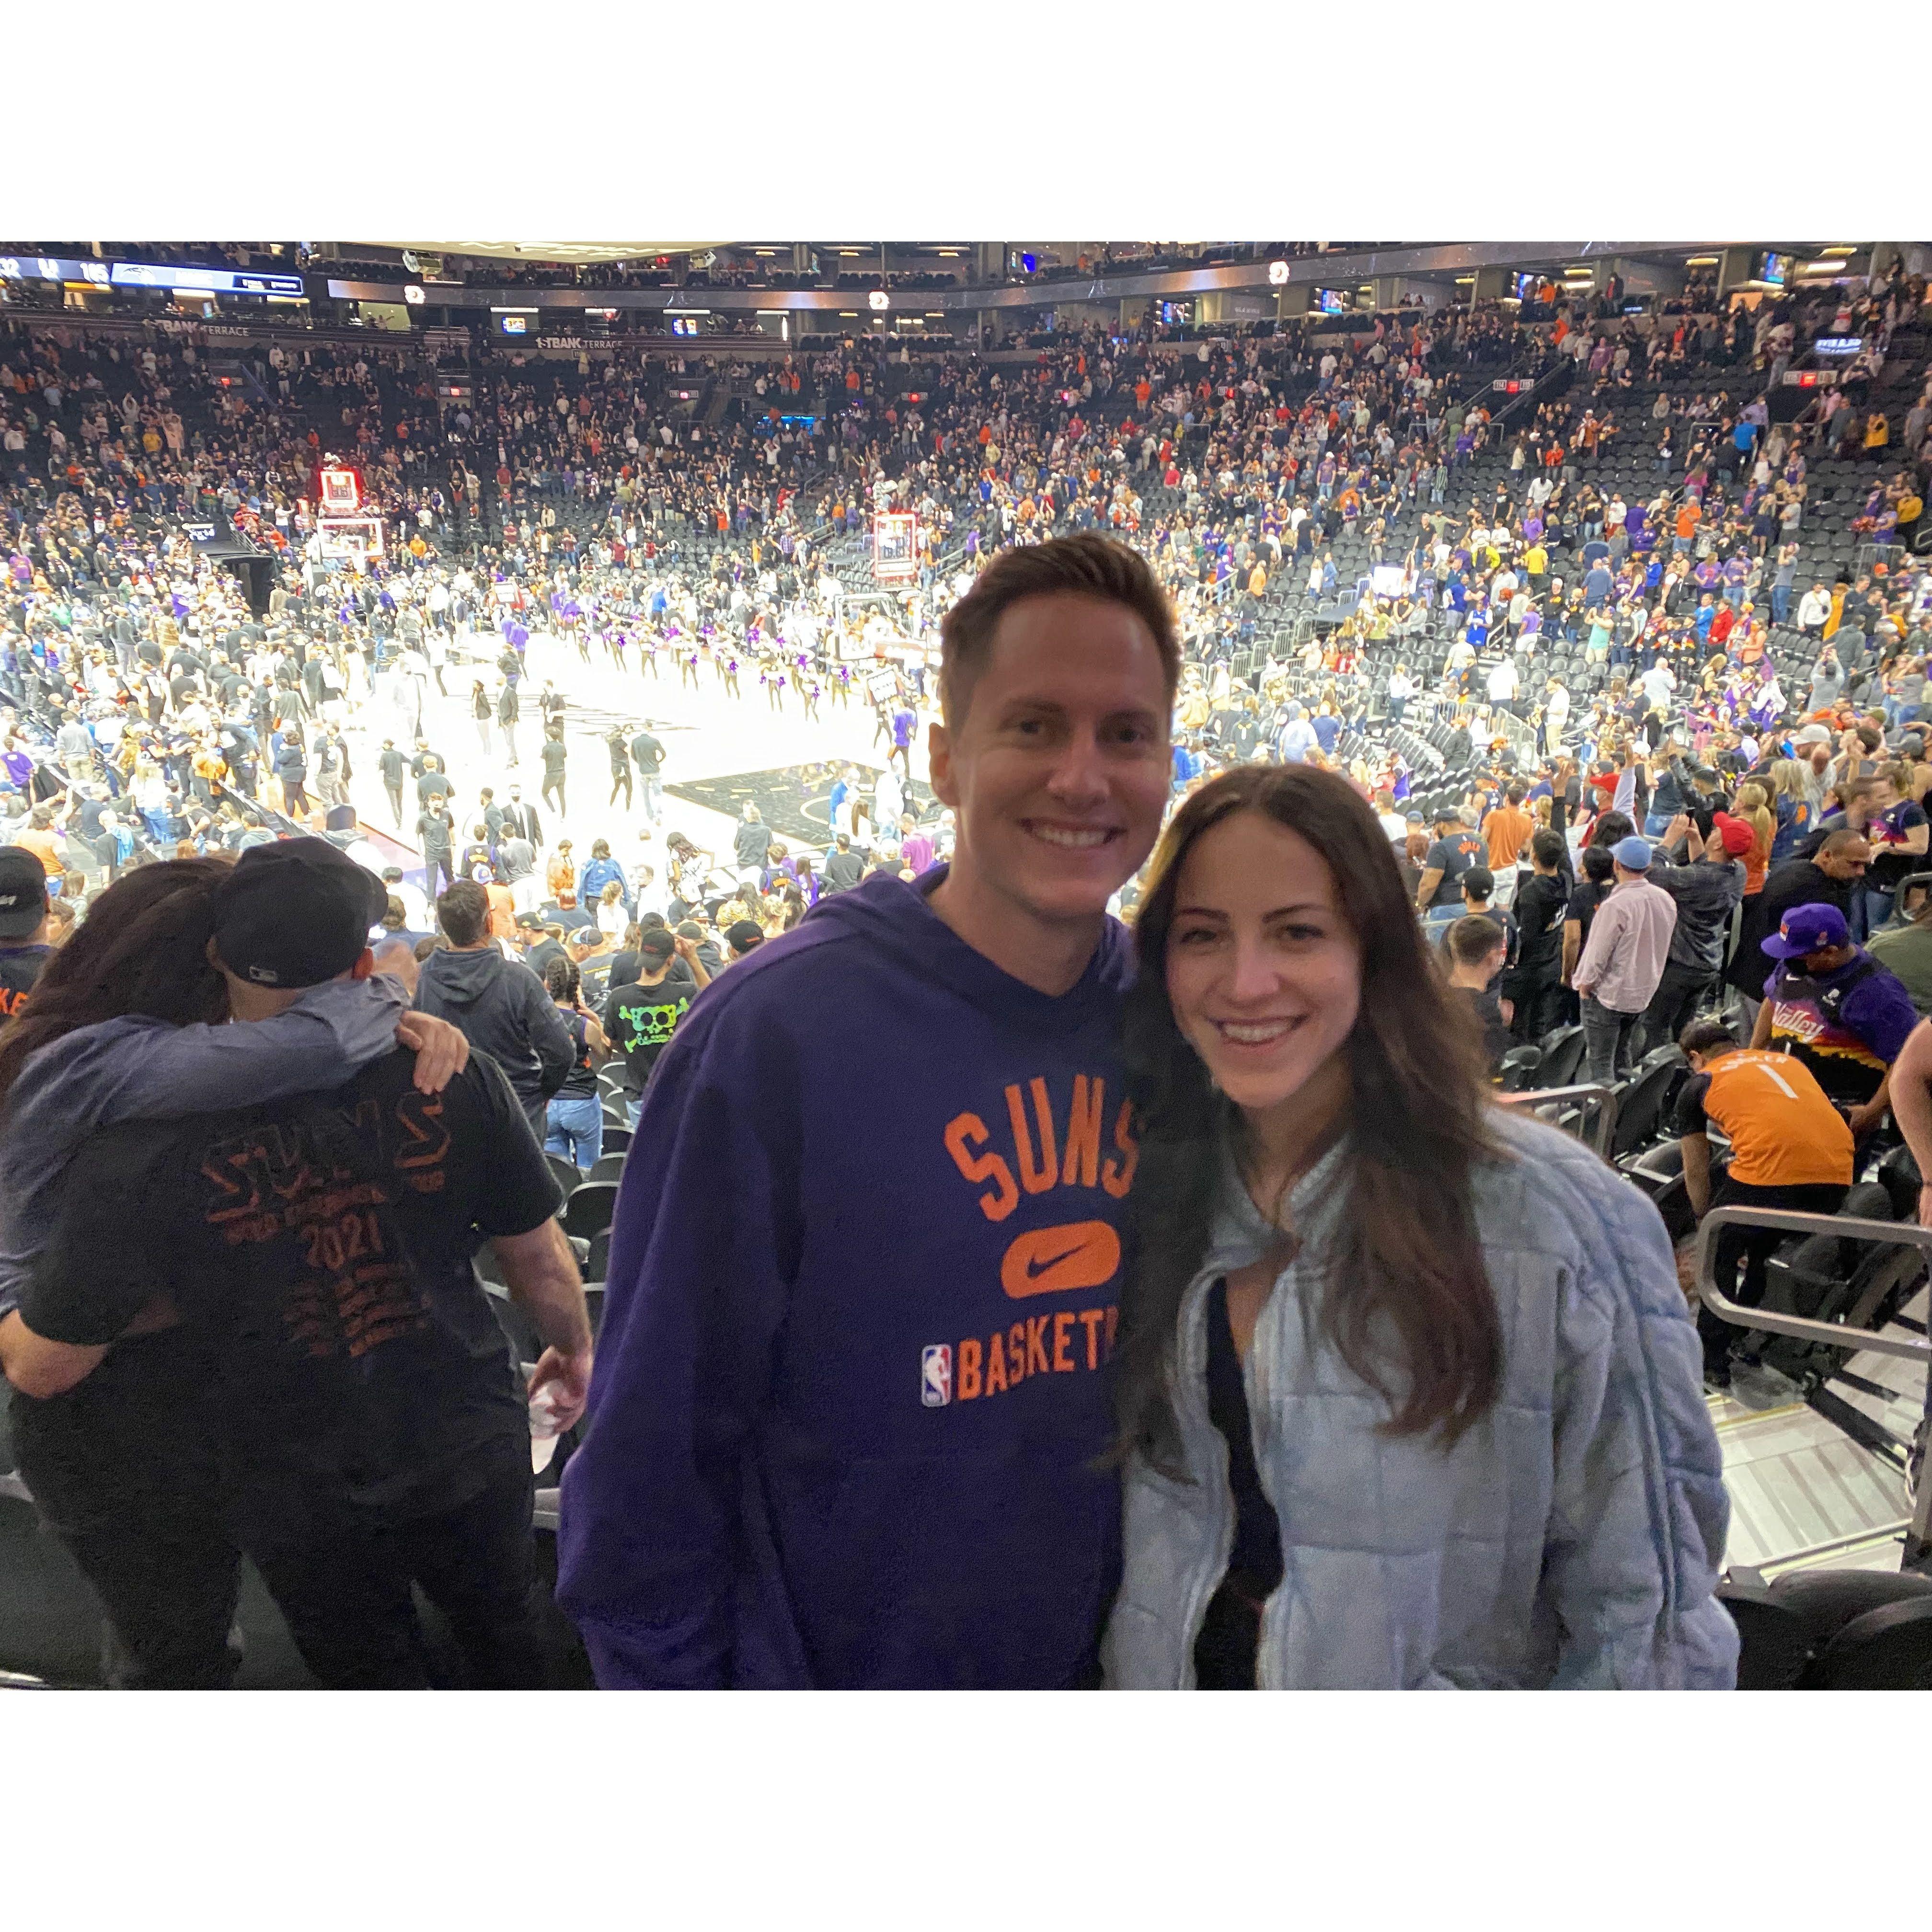 GO SUNS!!! Scott has converted Emily to be a suns fan 